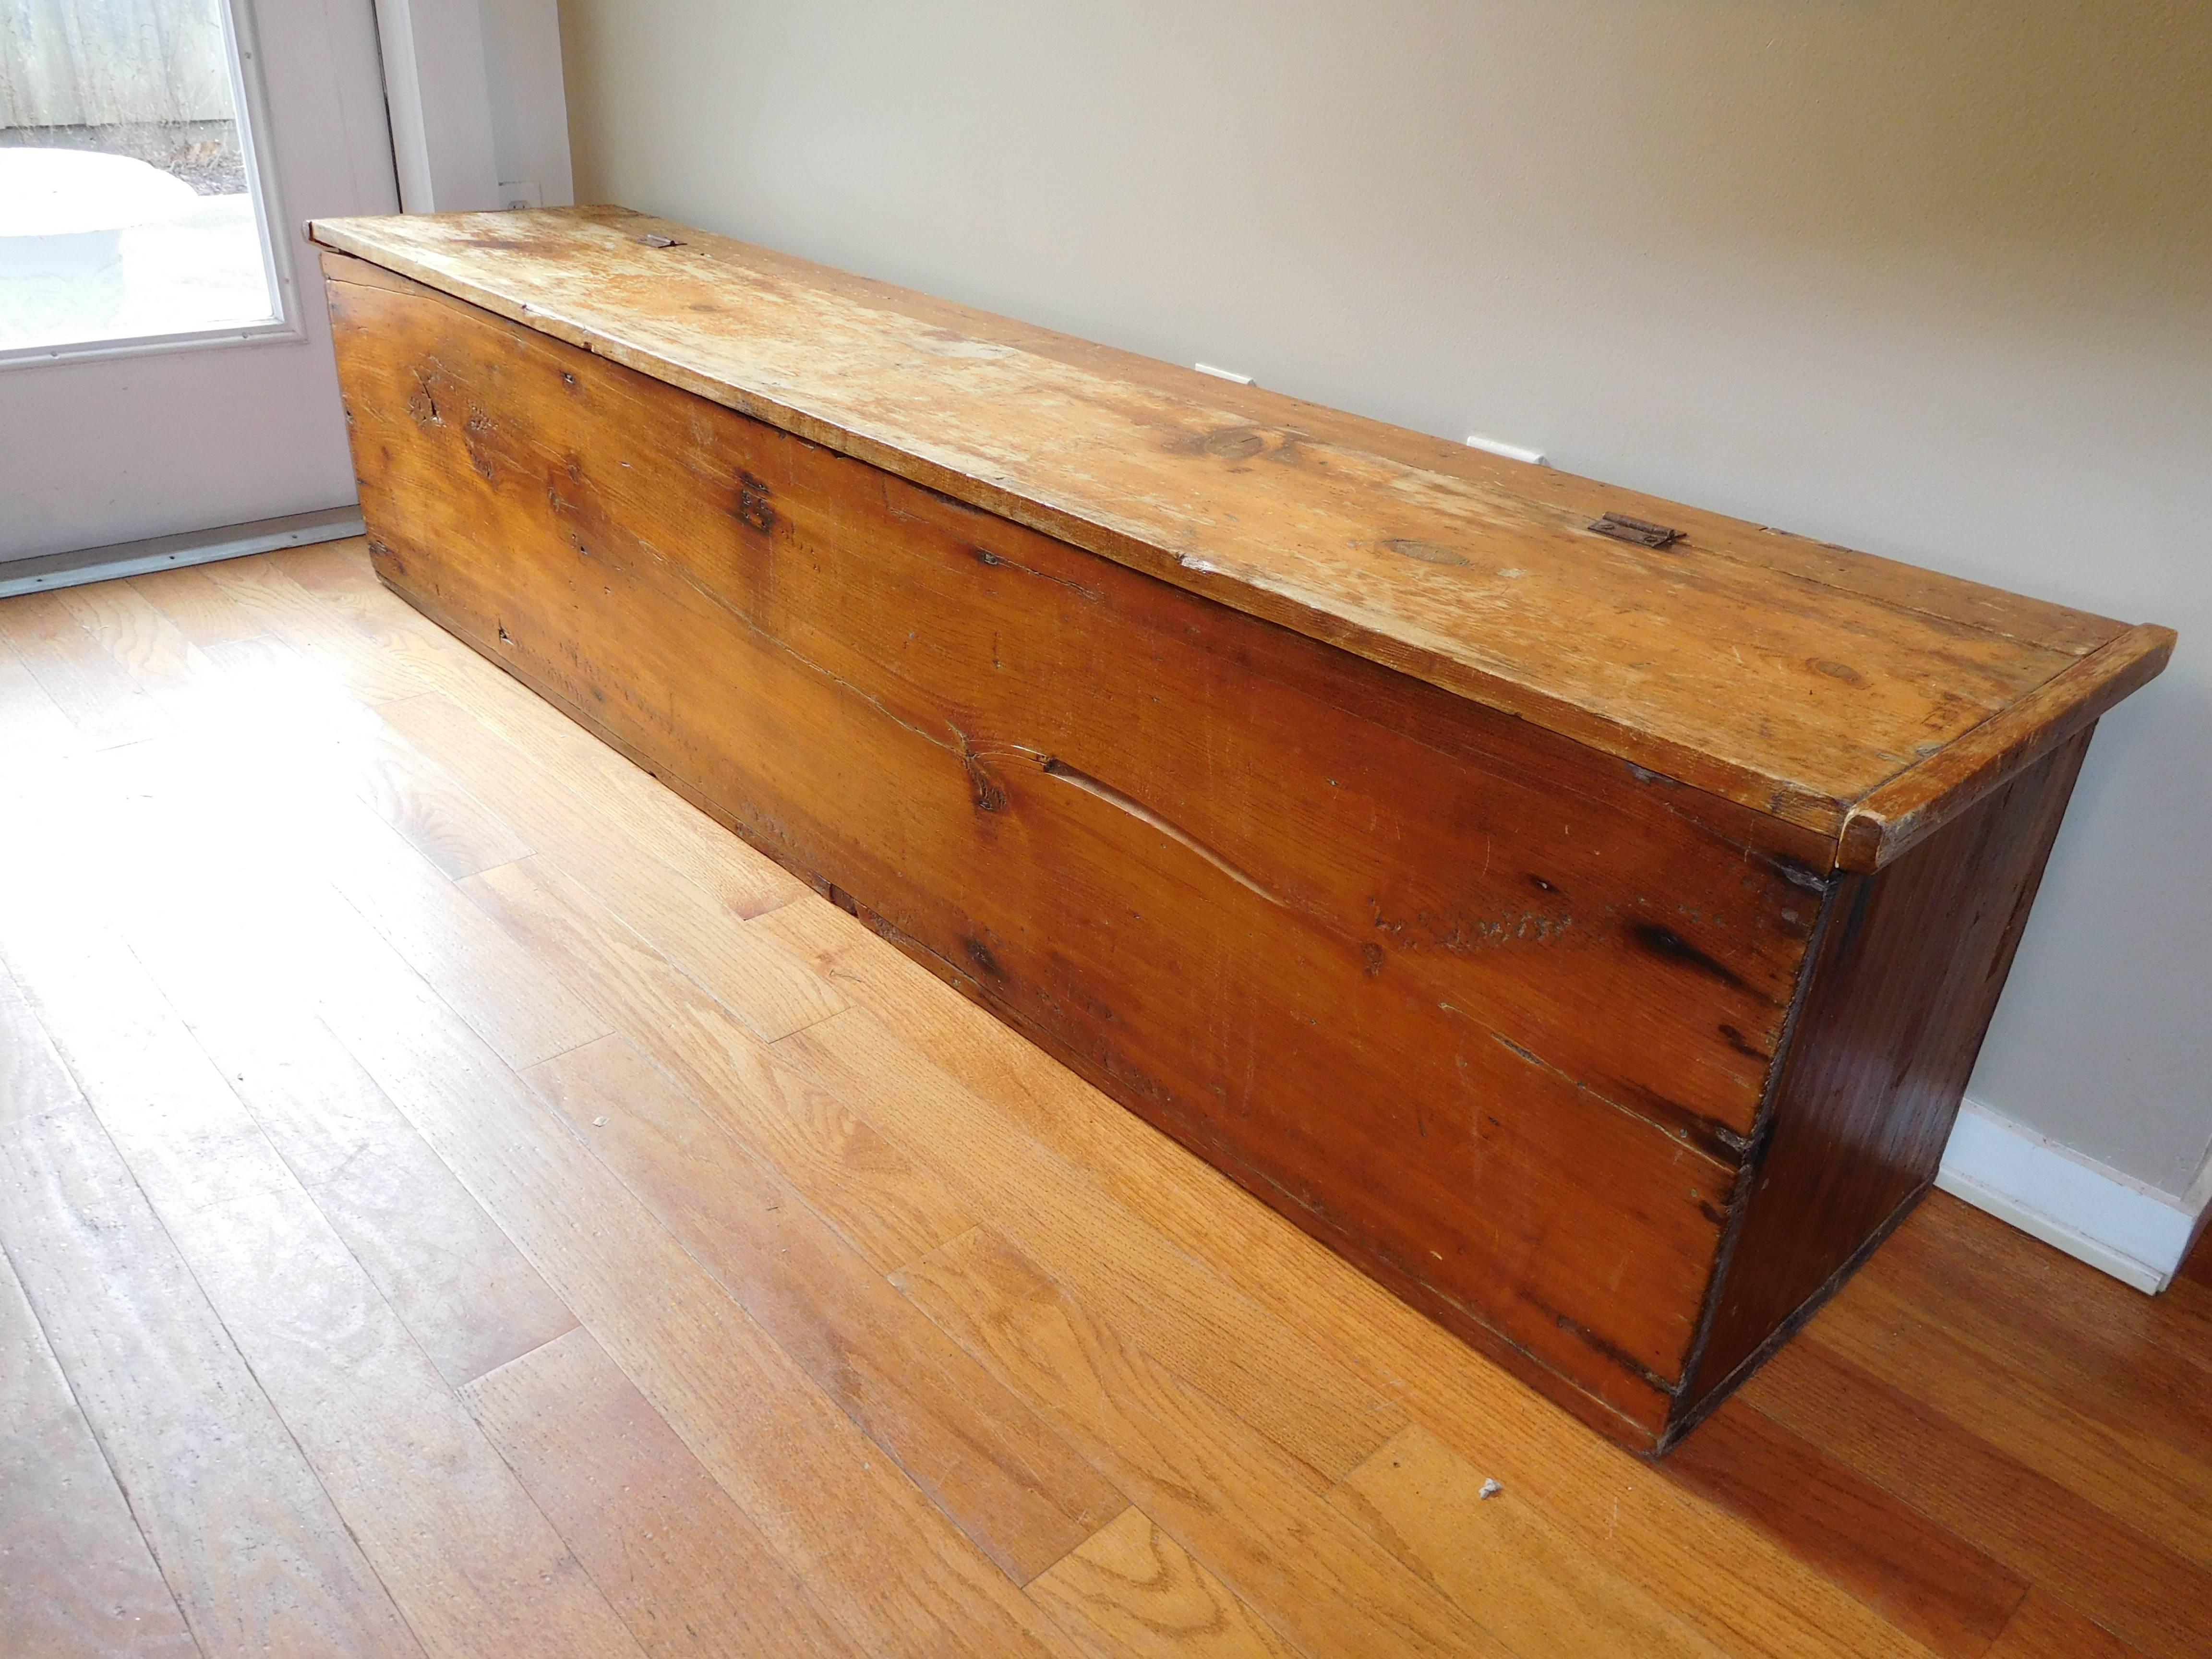 An Americana late 19th century pine bench with lots of storage. There are three storage compartments for toys or towels, blankets.
Great for a wet room or entrance way, good for storing boots, hats, gloves, sports paraphernalia and on and on.